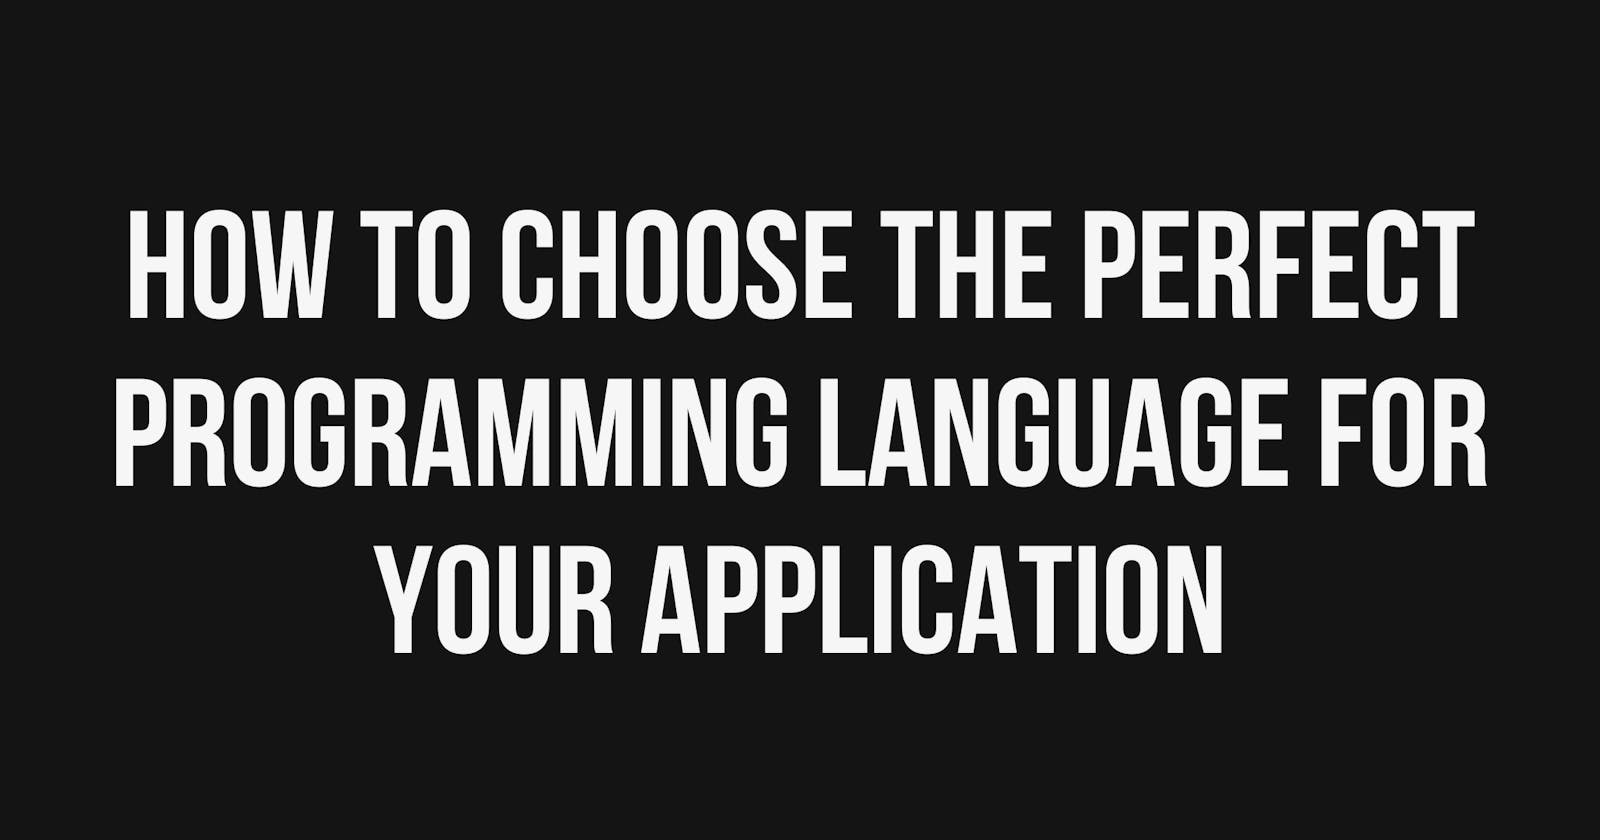 How to choose the perfect programming language for your application